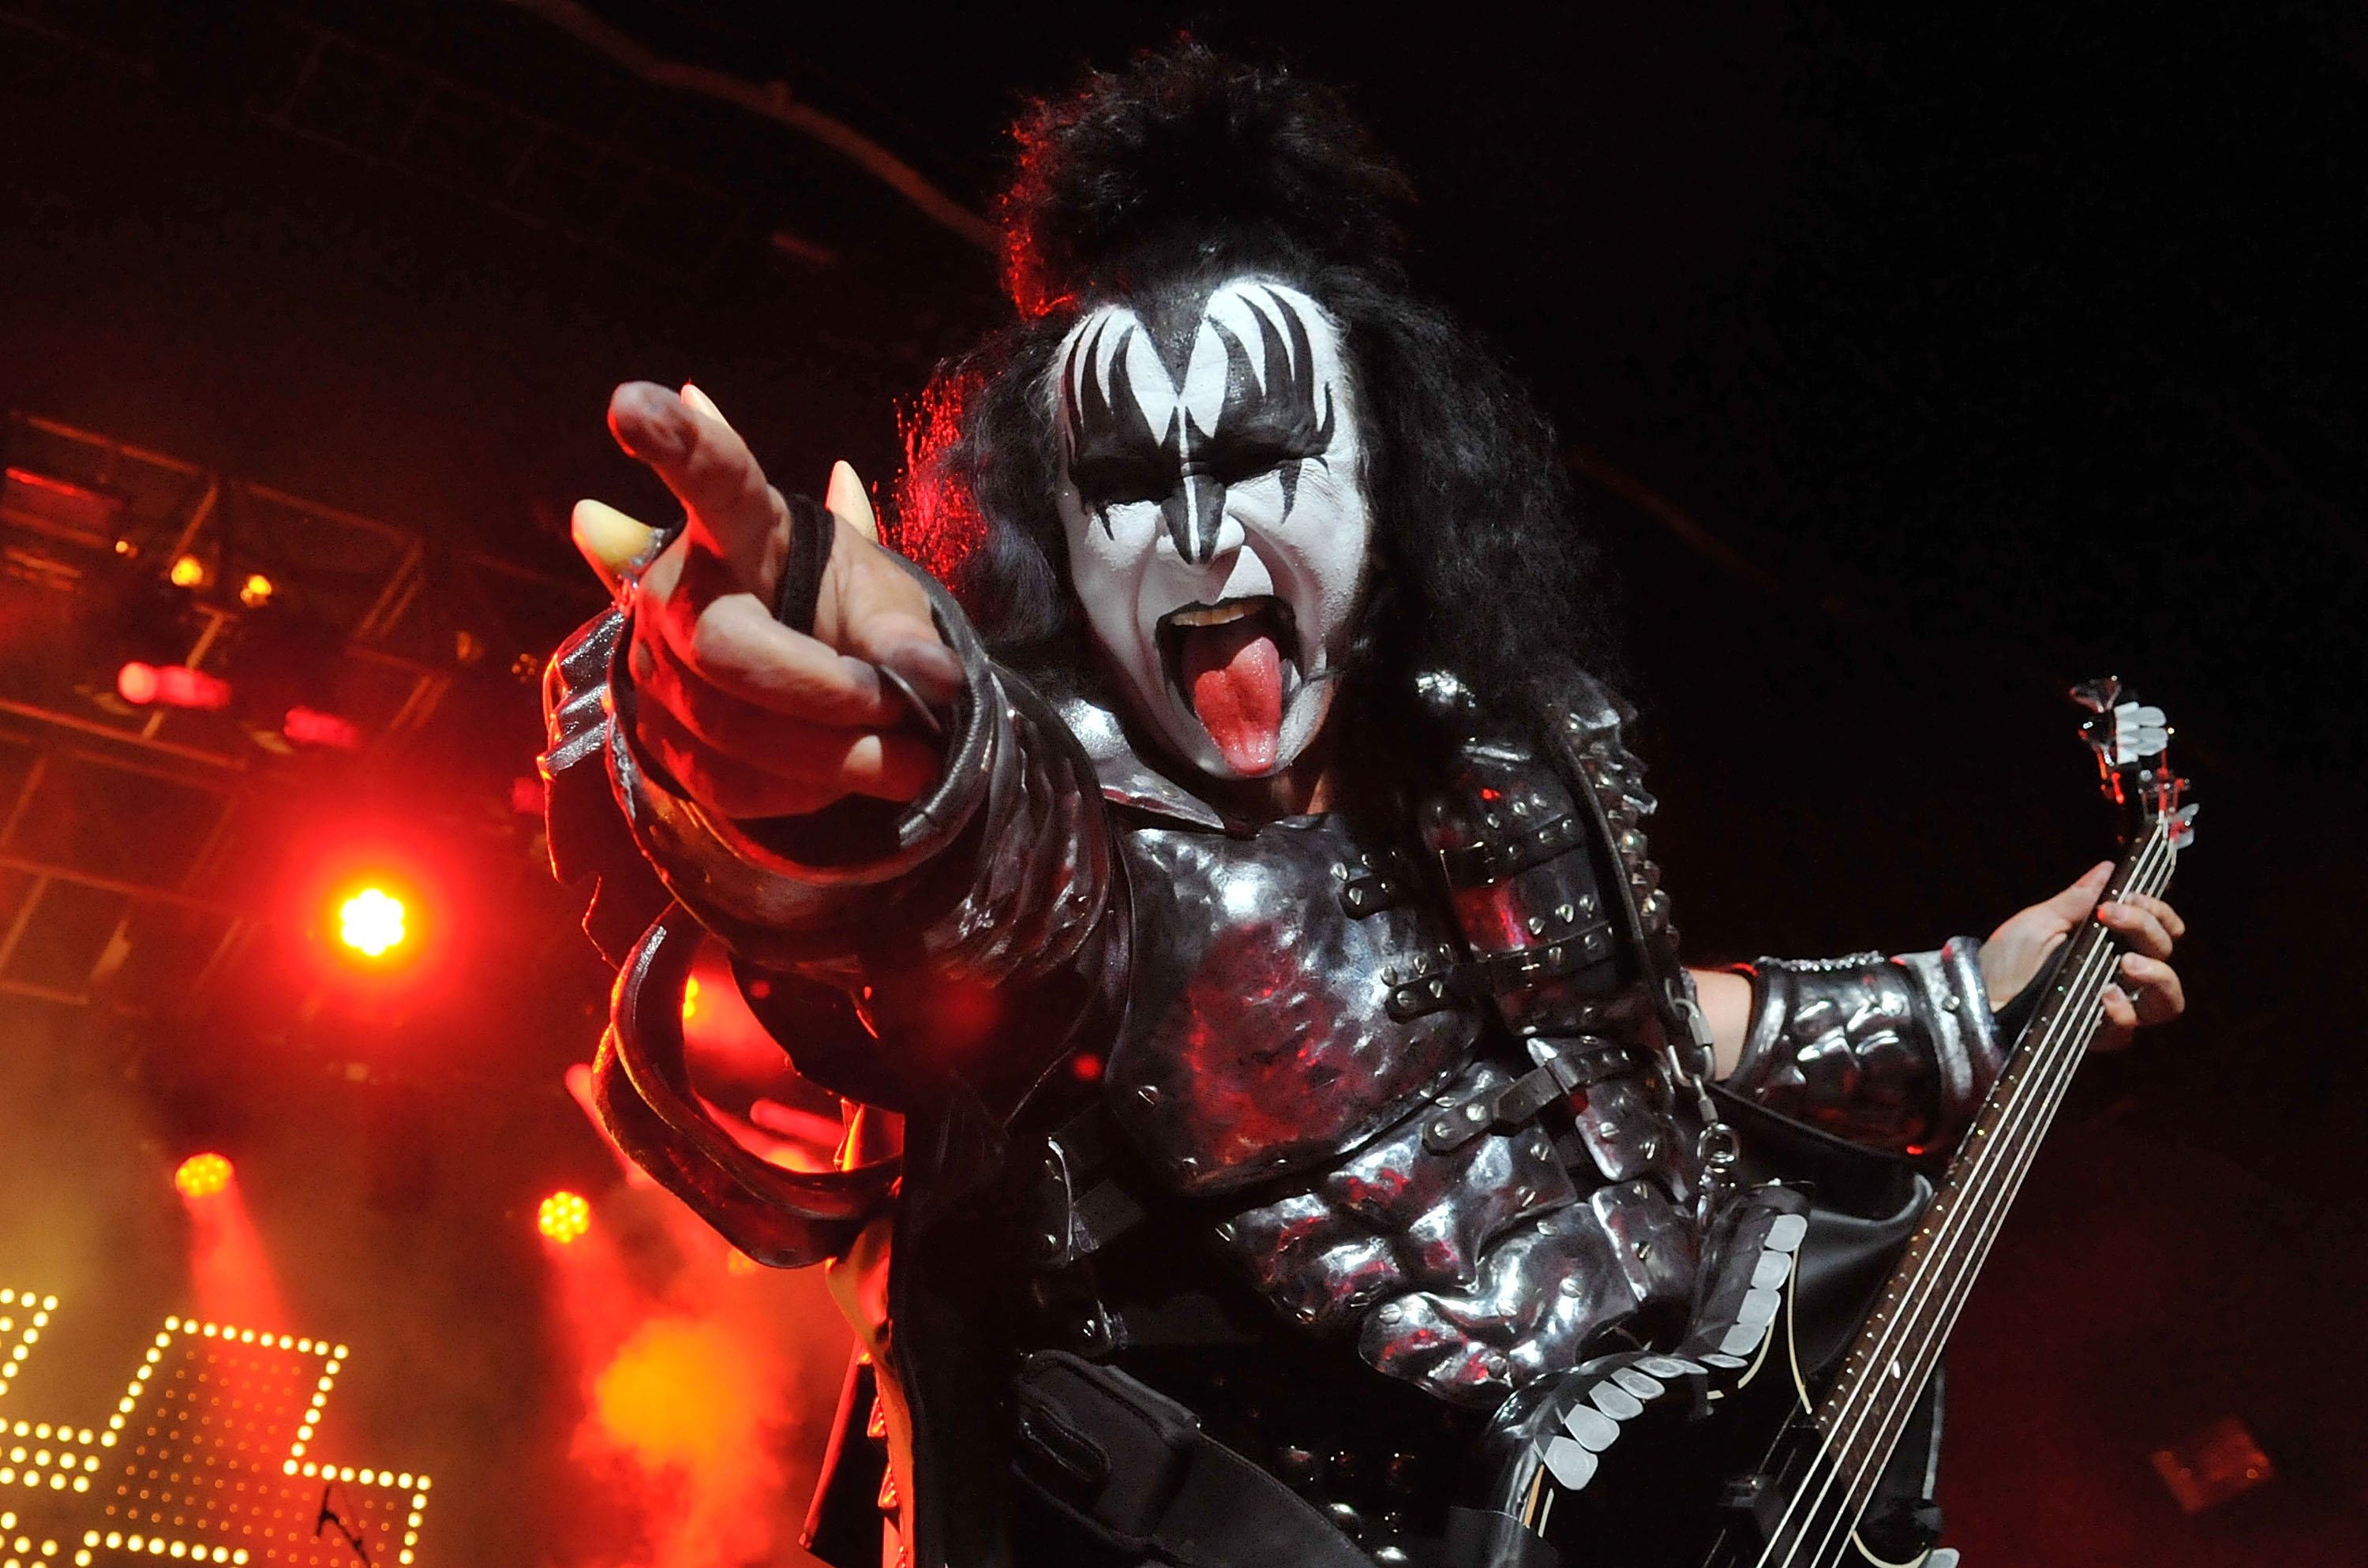 Gene Simmons of Kiss sticking his tongue out